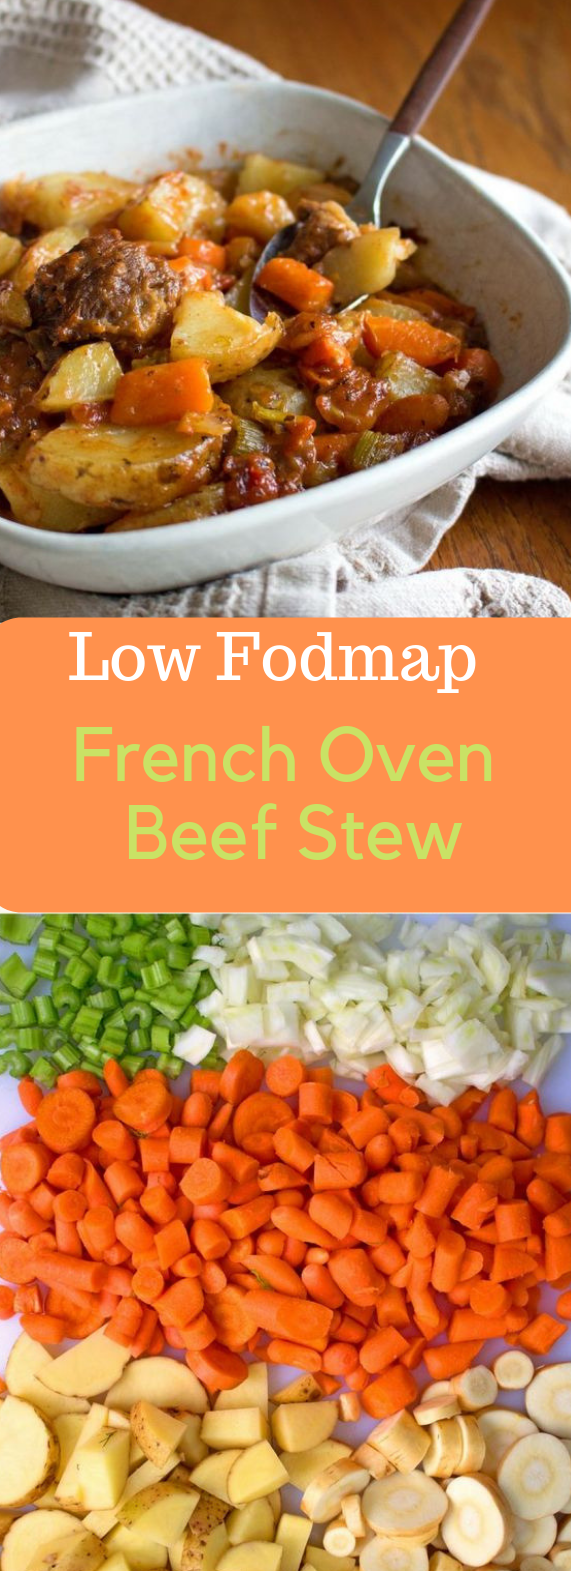 Low FODMAP French Oven Beef Stew #dietfood #eathealthy